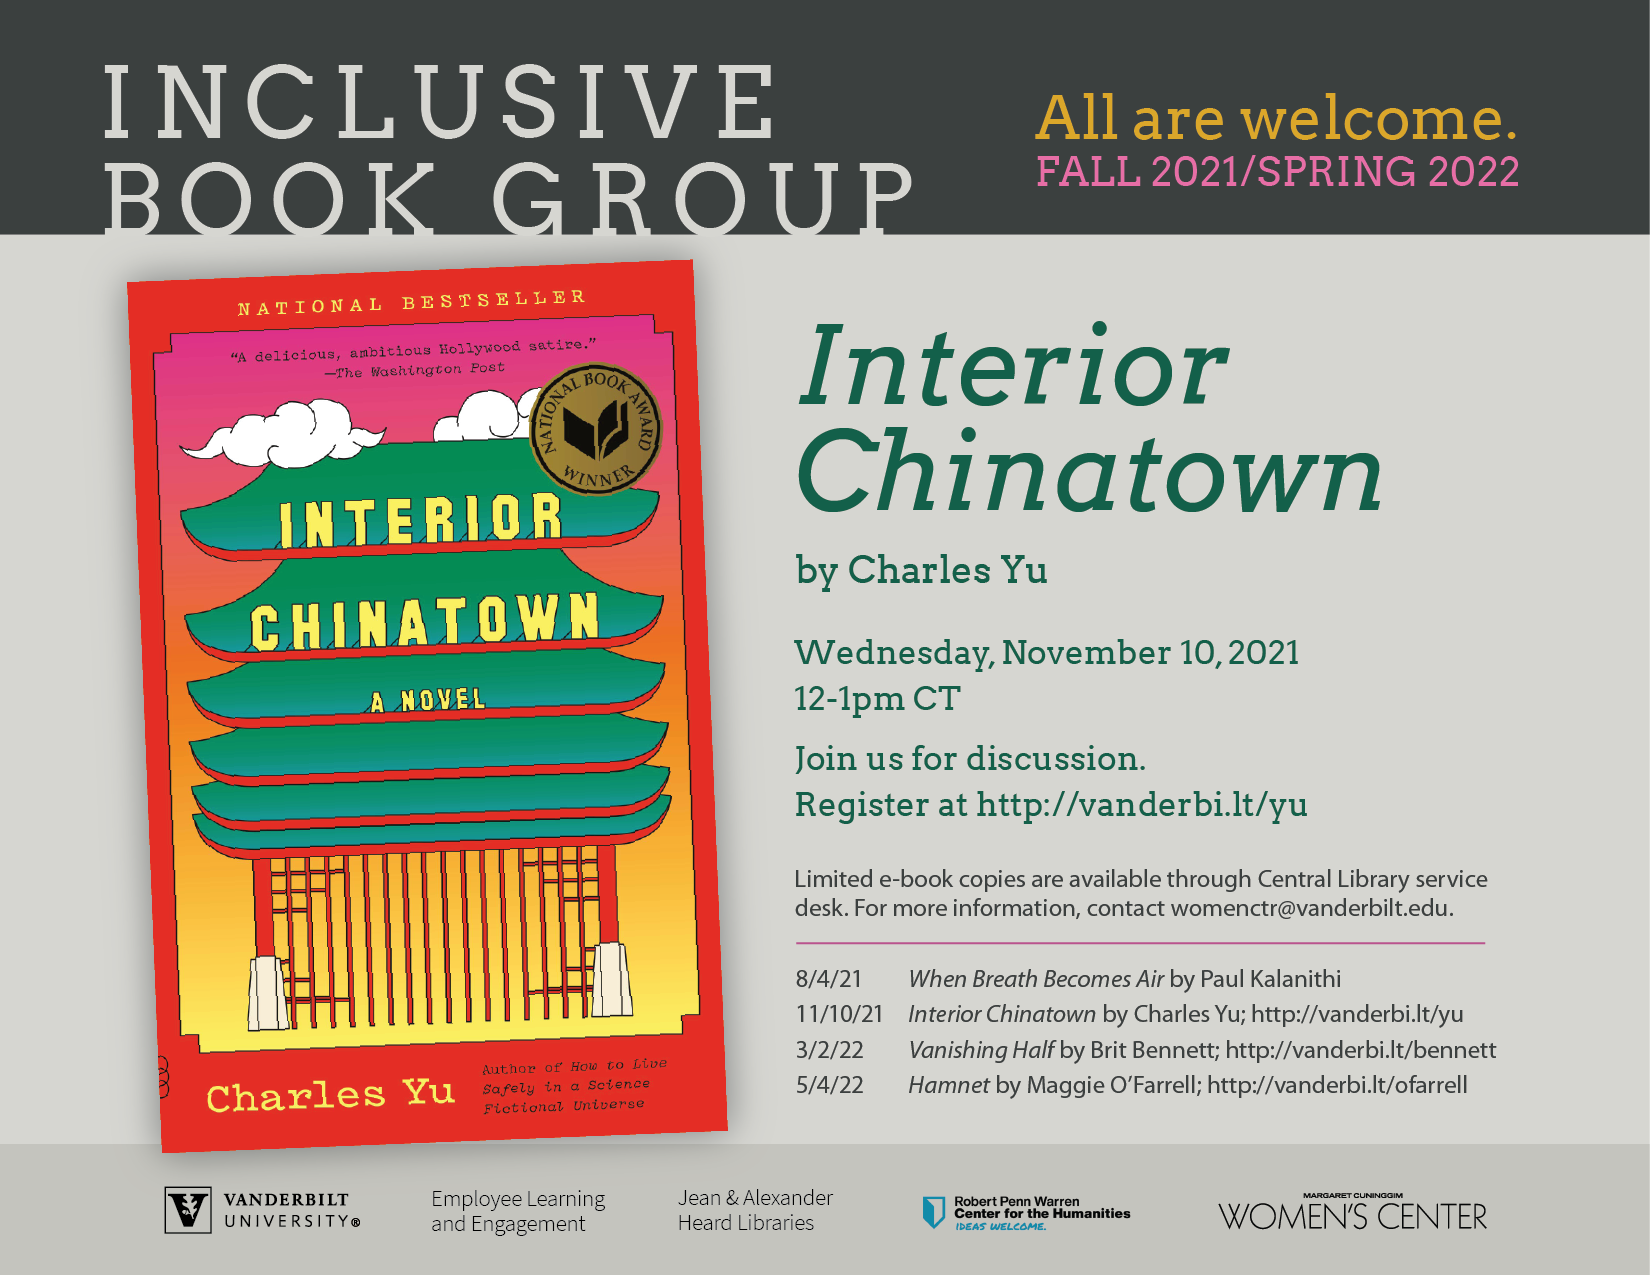 Inclusive Book Group: Interior Chinatown by Charles Yu